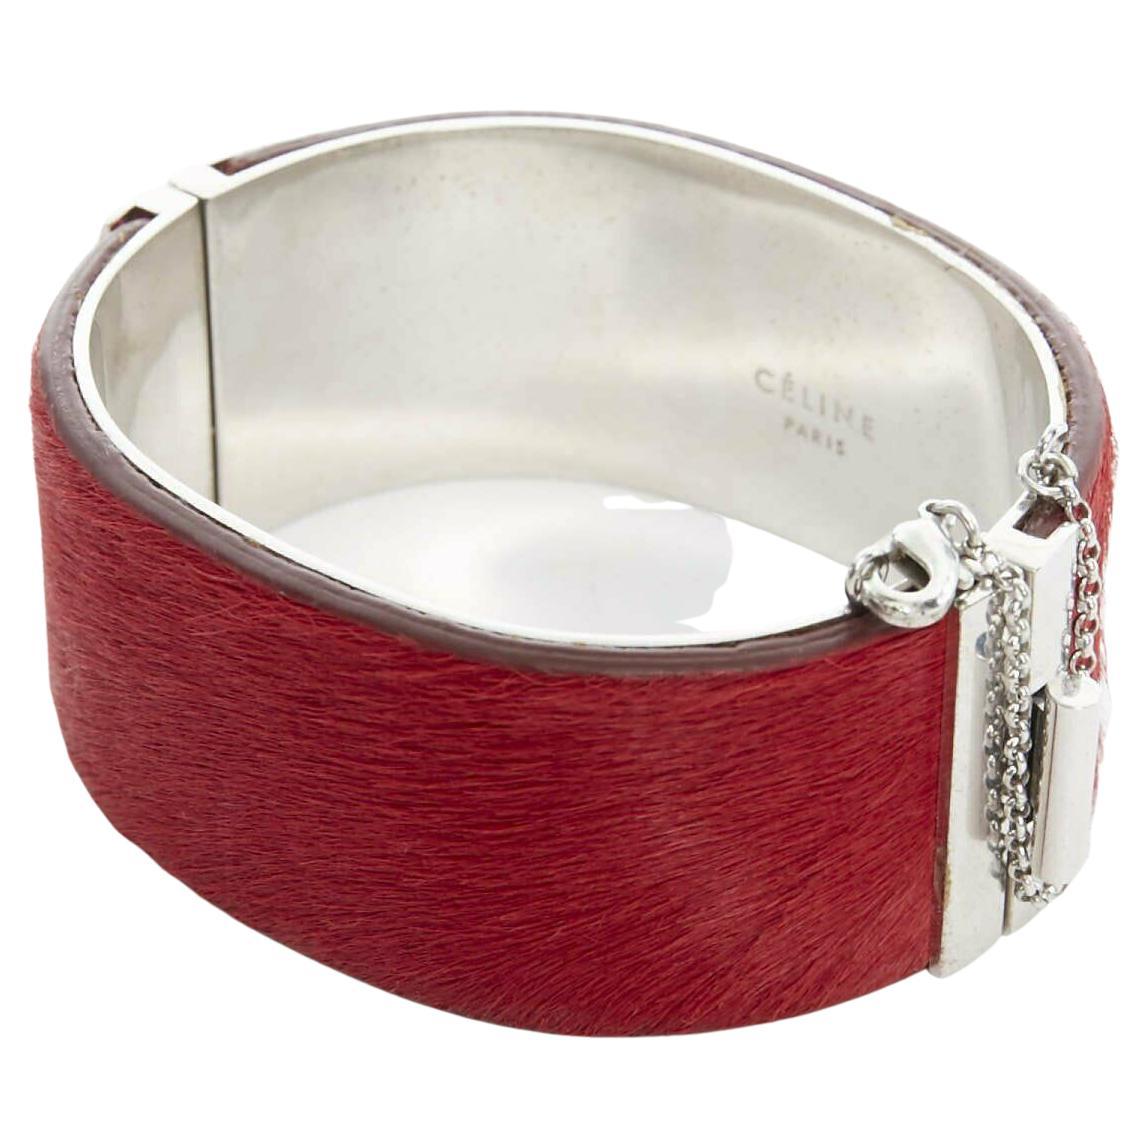 CELINE PHOEBE PHILO red horse hair leather silver hardware chained bangle cuff S